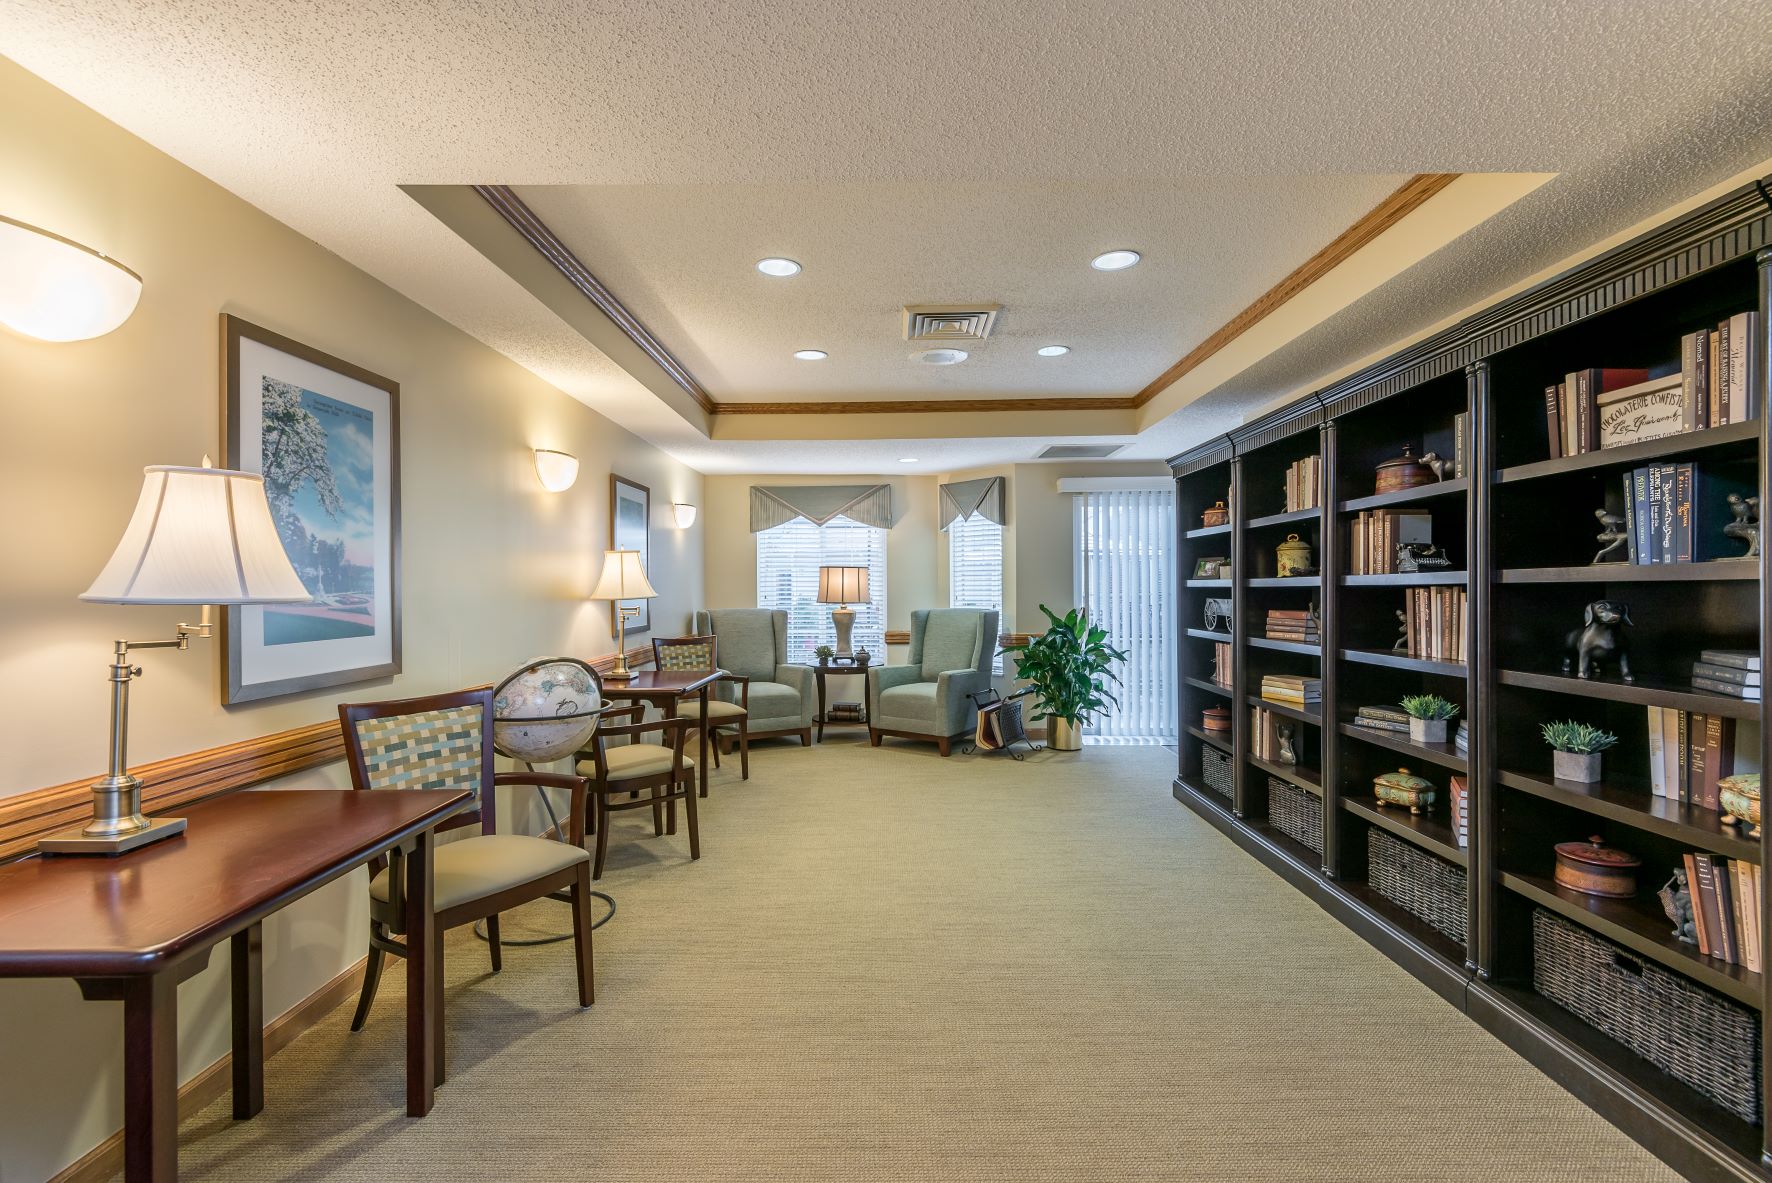 The Neighborhood at Tellico Village offers I wide collection of books at our on-site library.